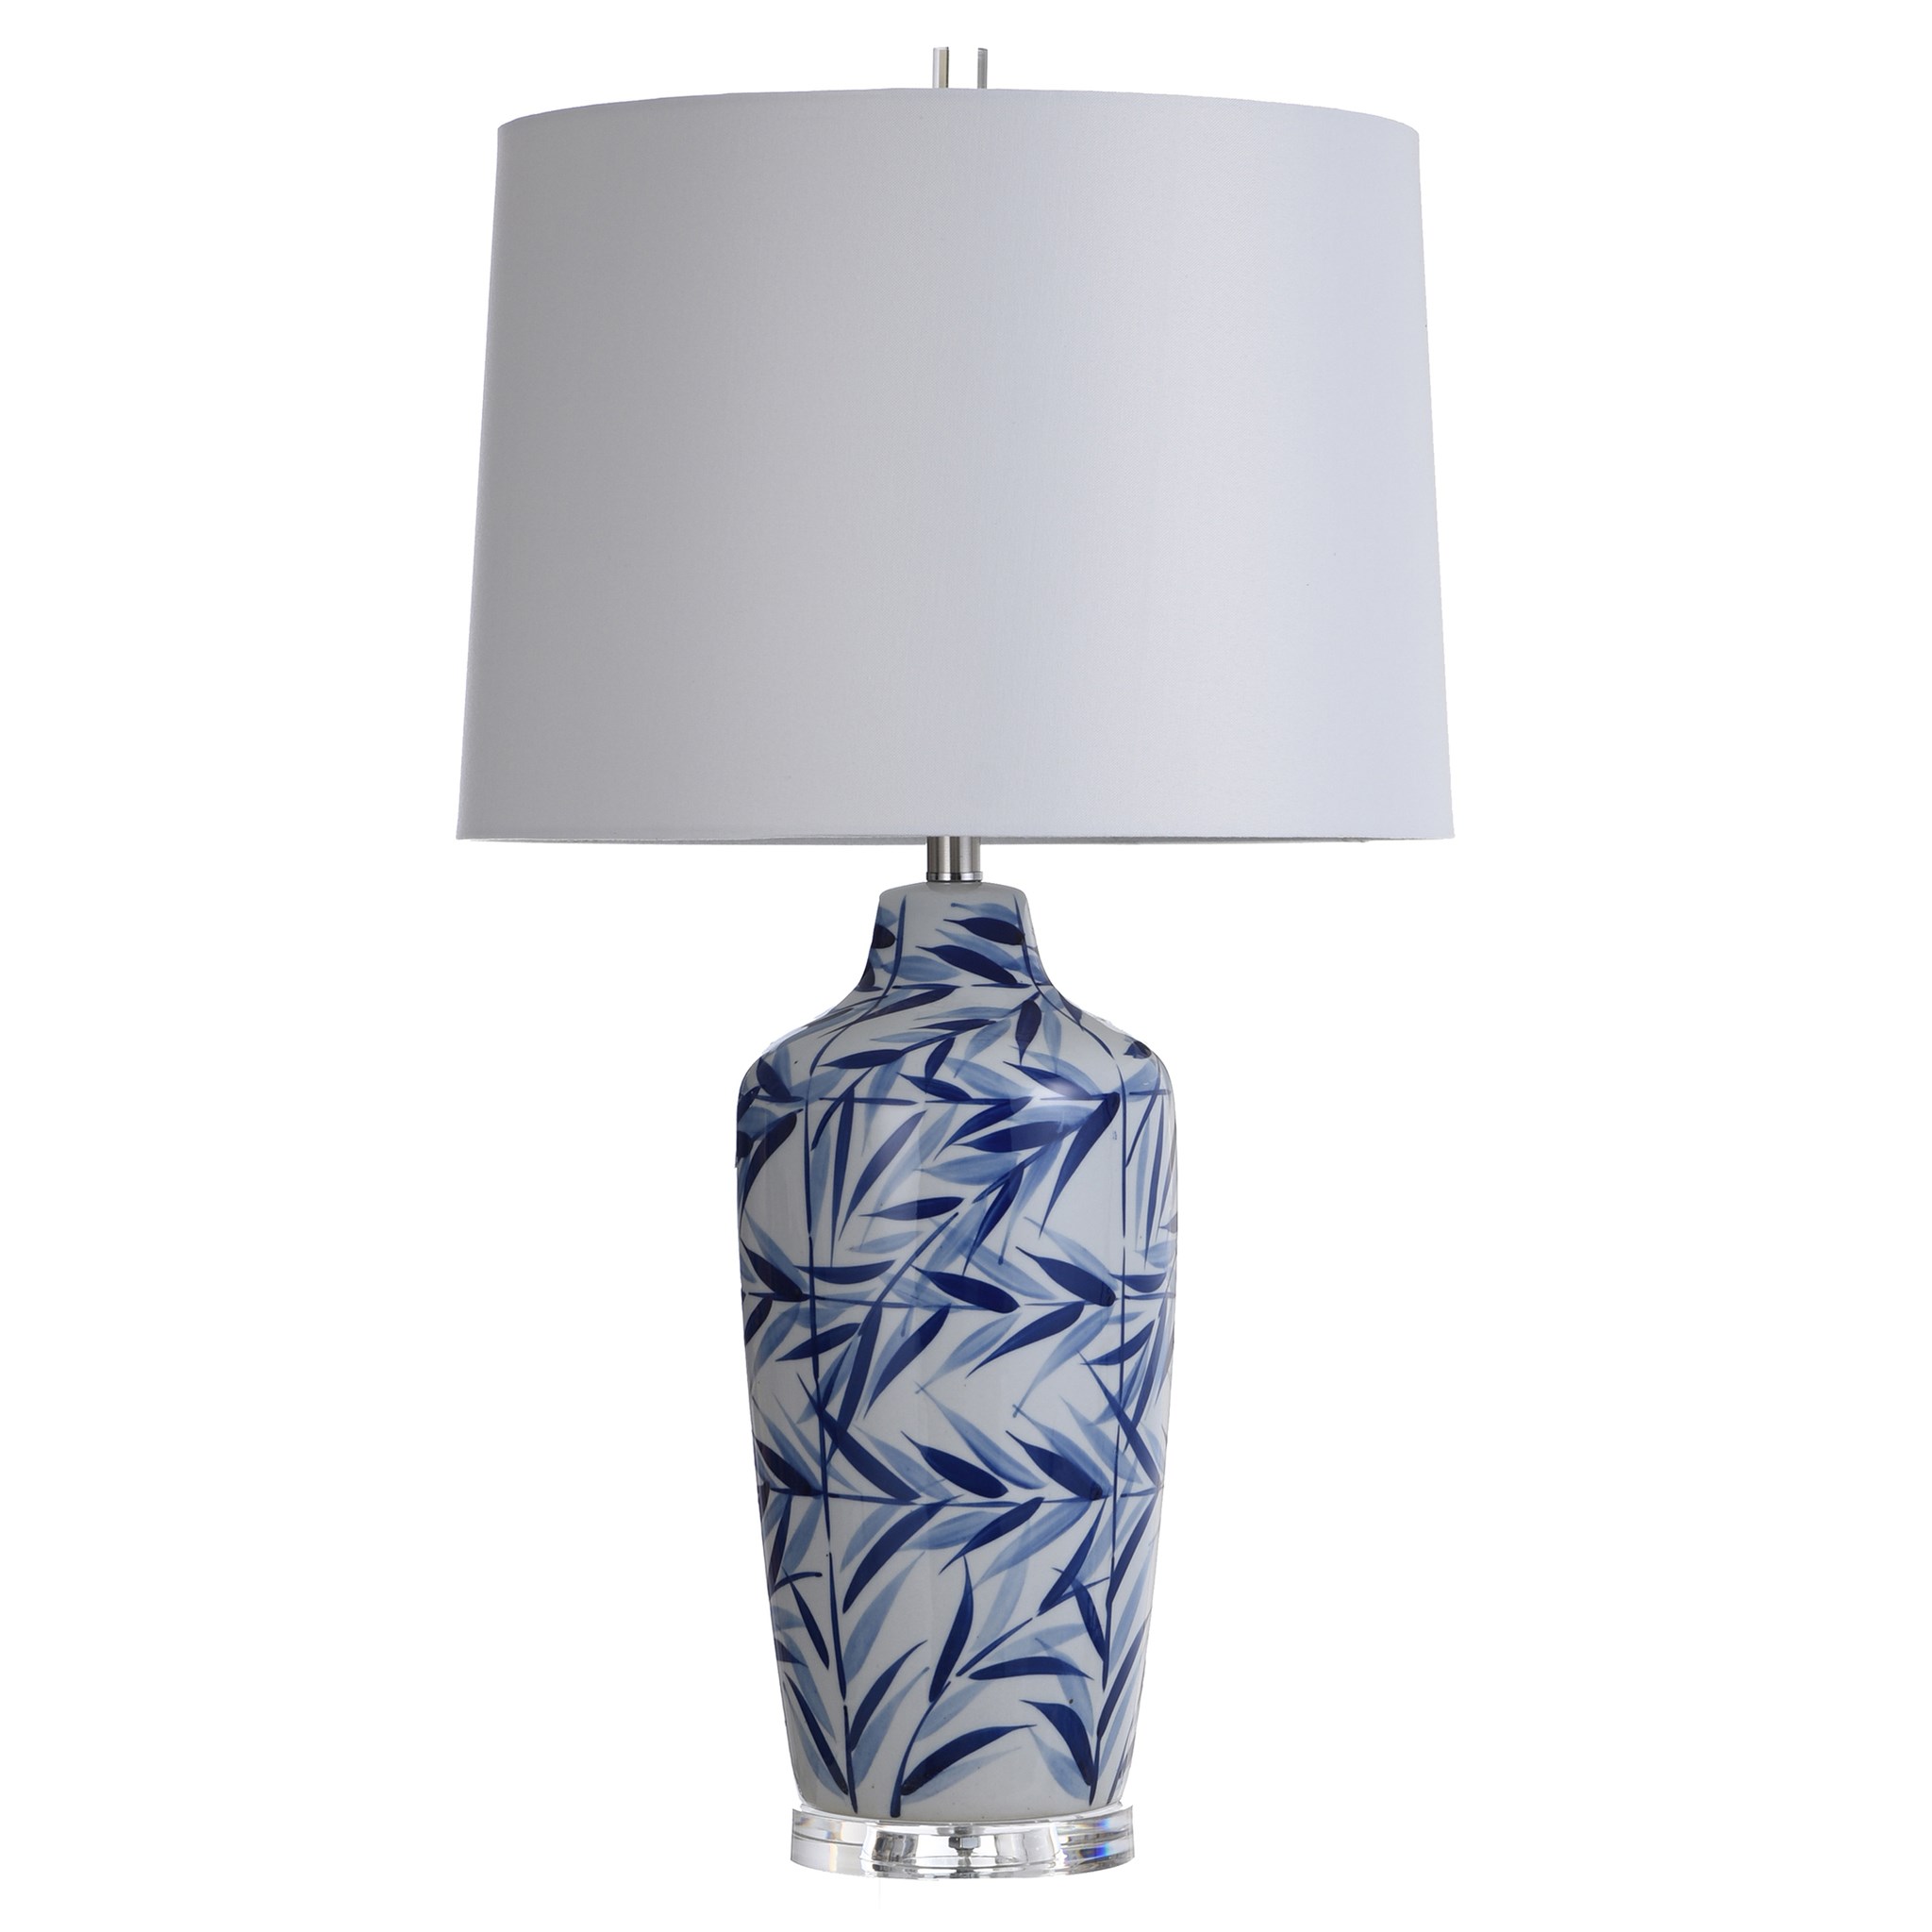 Hesper Blue 33in Traditional Blue and White Ceramic Table Lamp with Leaf Design on Acrylic